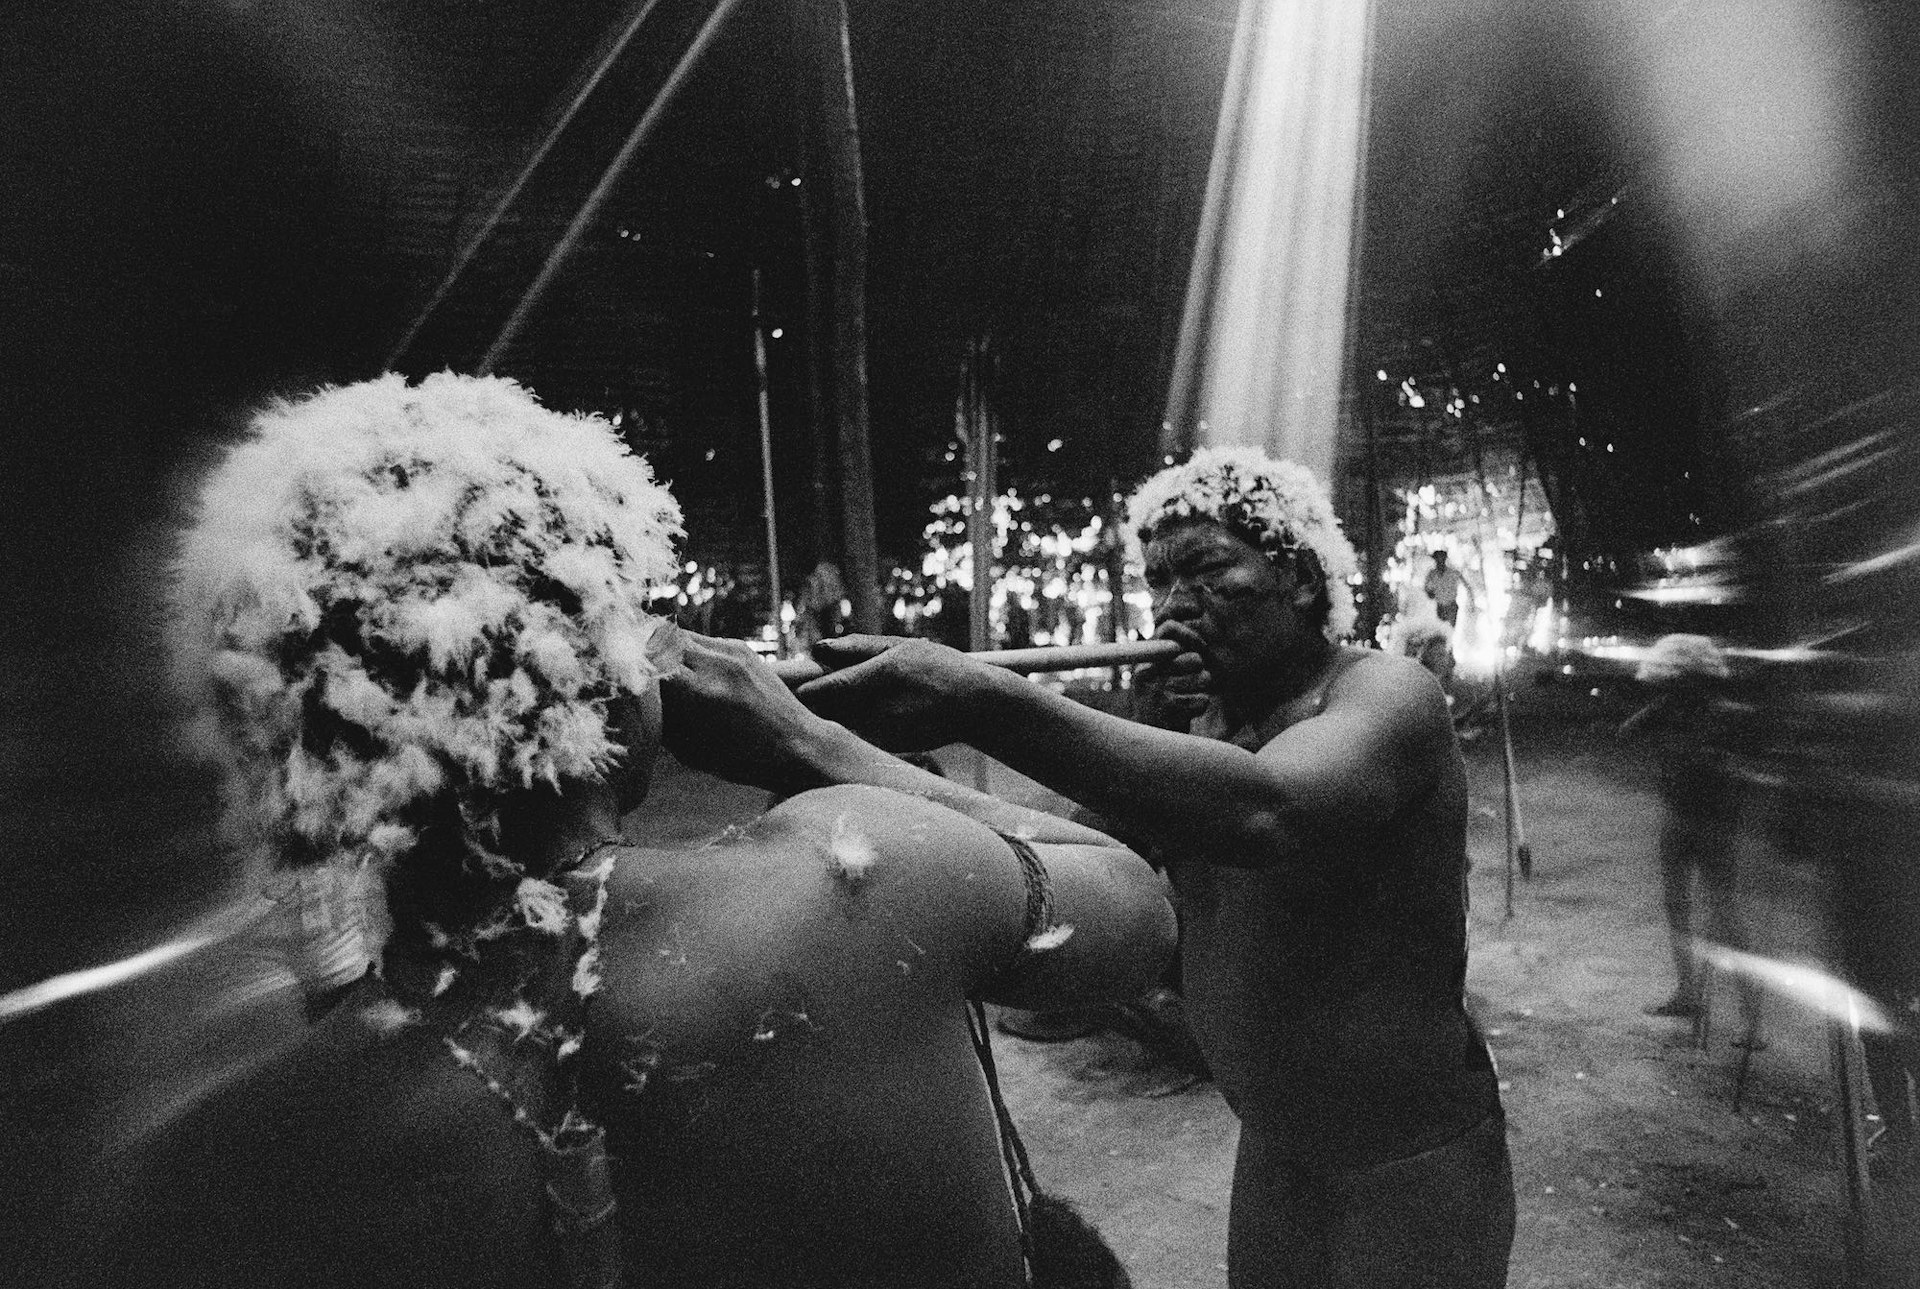 Amazon The shaman Tuxaua João blows on the hallucinogen yãkoana in the nostrils of a young man at the end of the reahu feast, Catrimani, Roraima, 1974